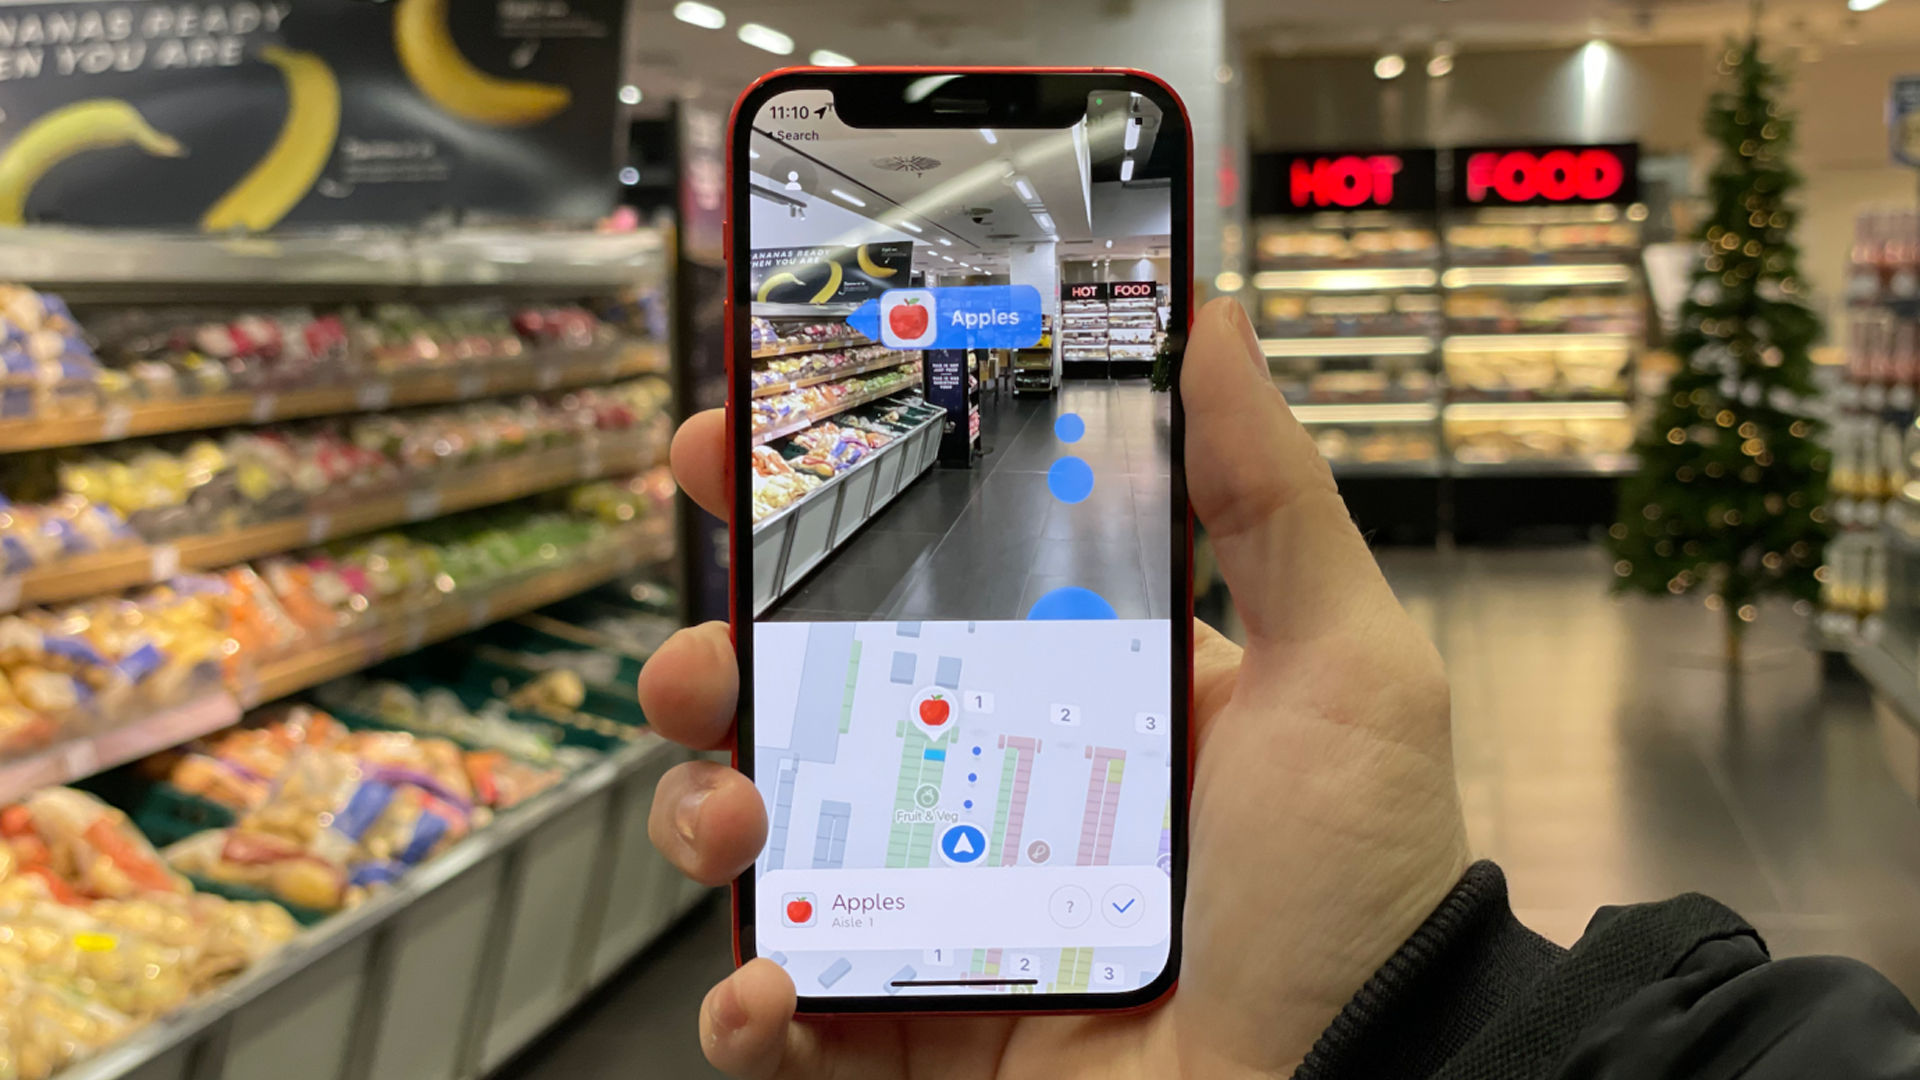 An image that shows how augmented reality works. A hand holds a mobile phone in front of a supermarket aisle. On the screen of the mobile phone is information that is digitally overlaid over the real environment, the supermarket.